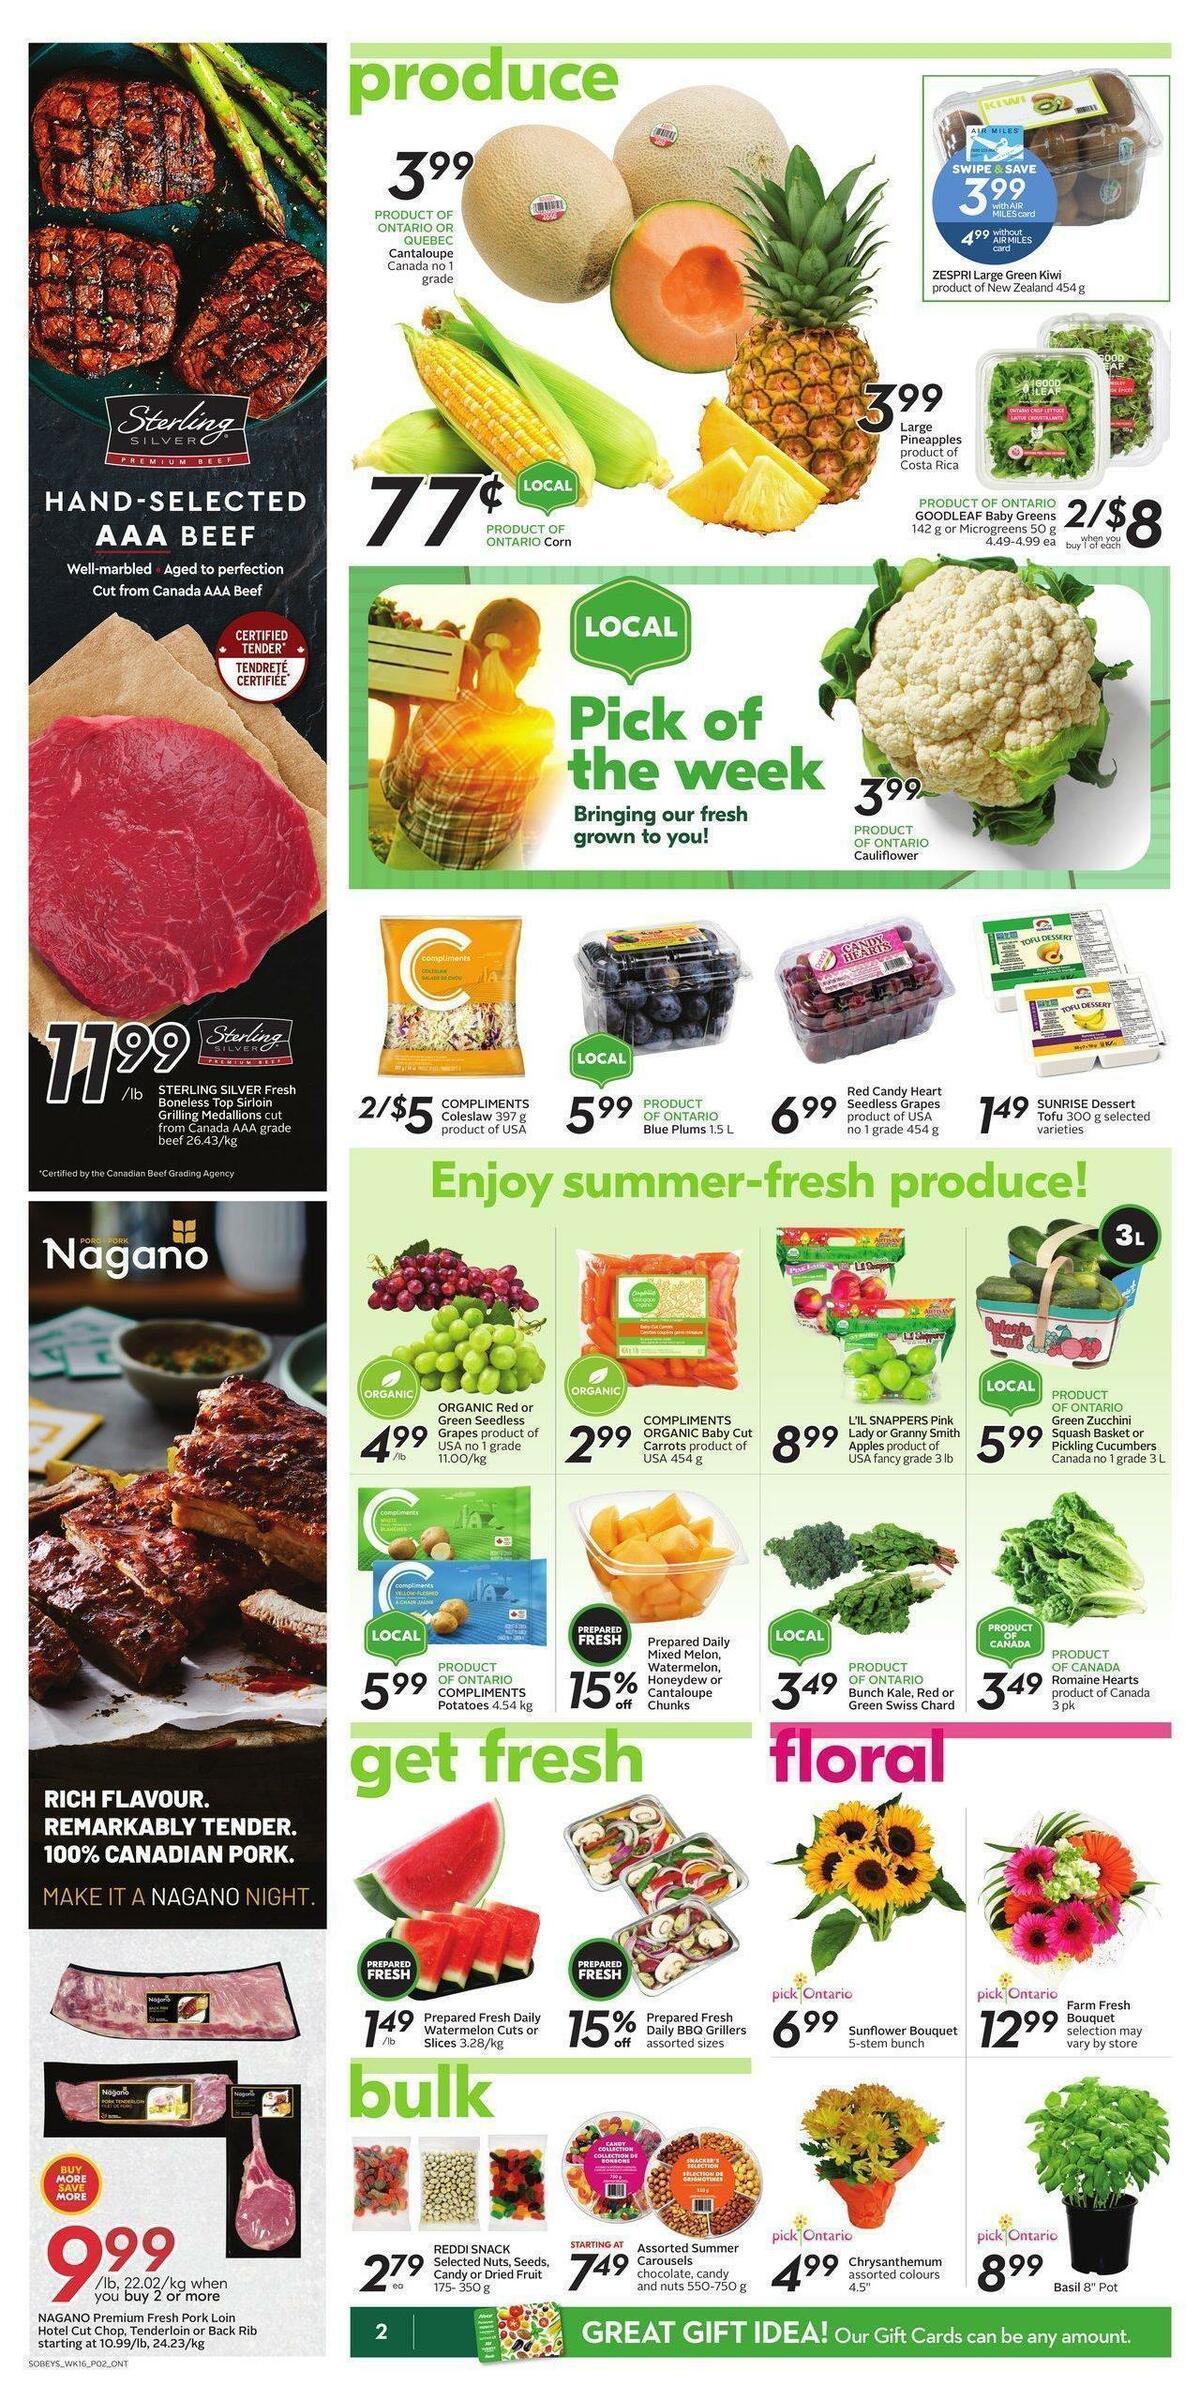 Sobeys Flyer from August 18